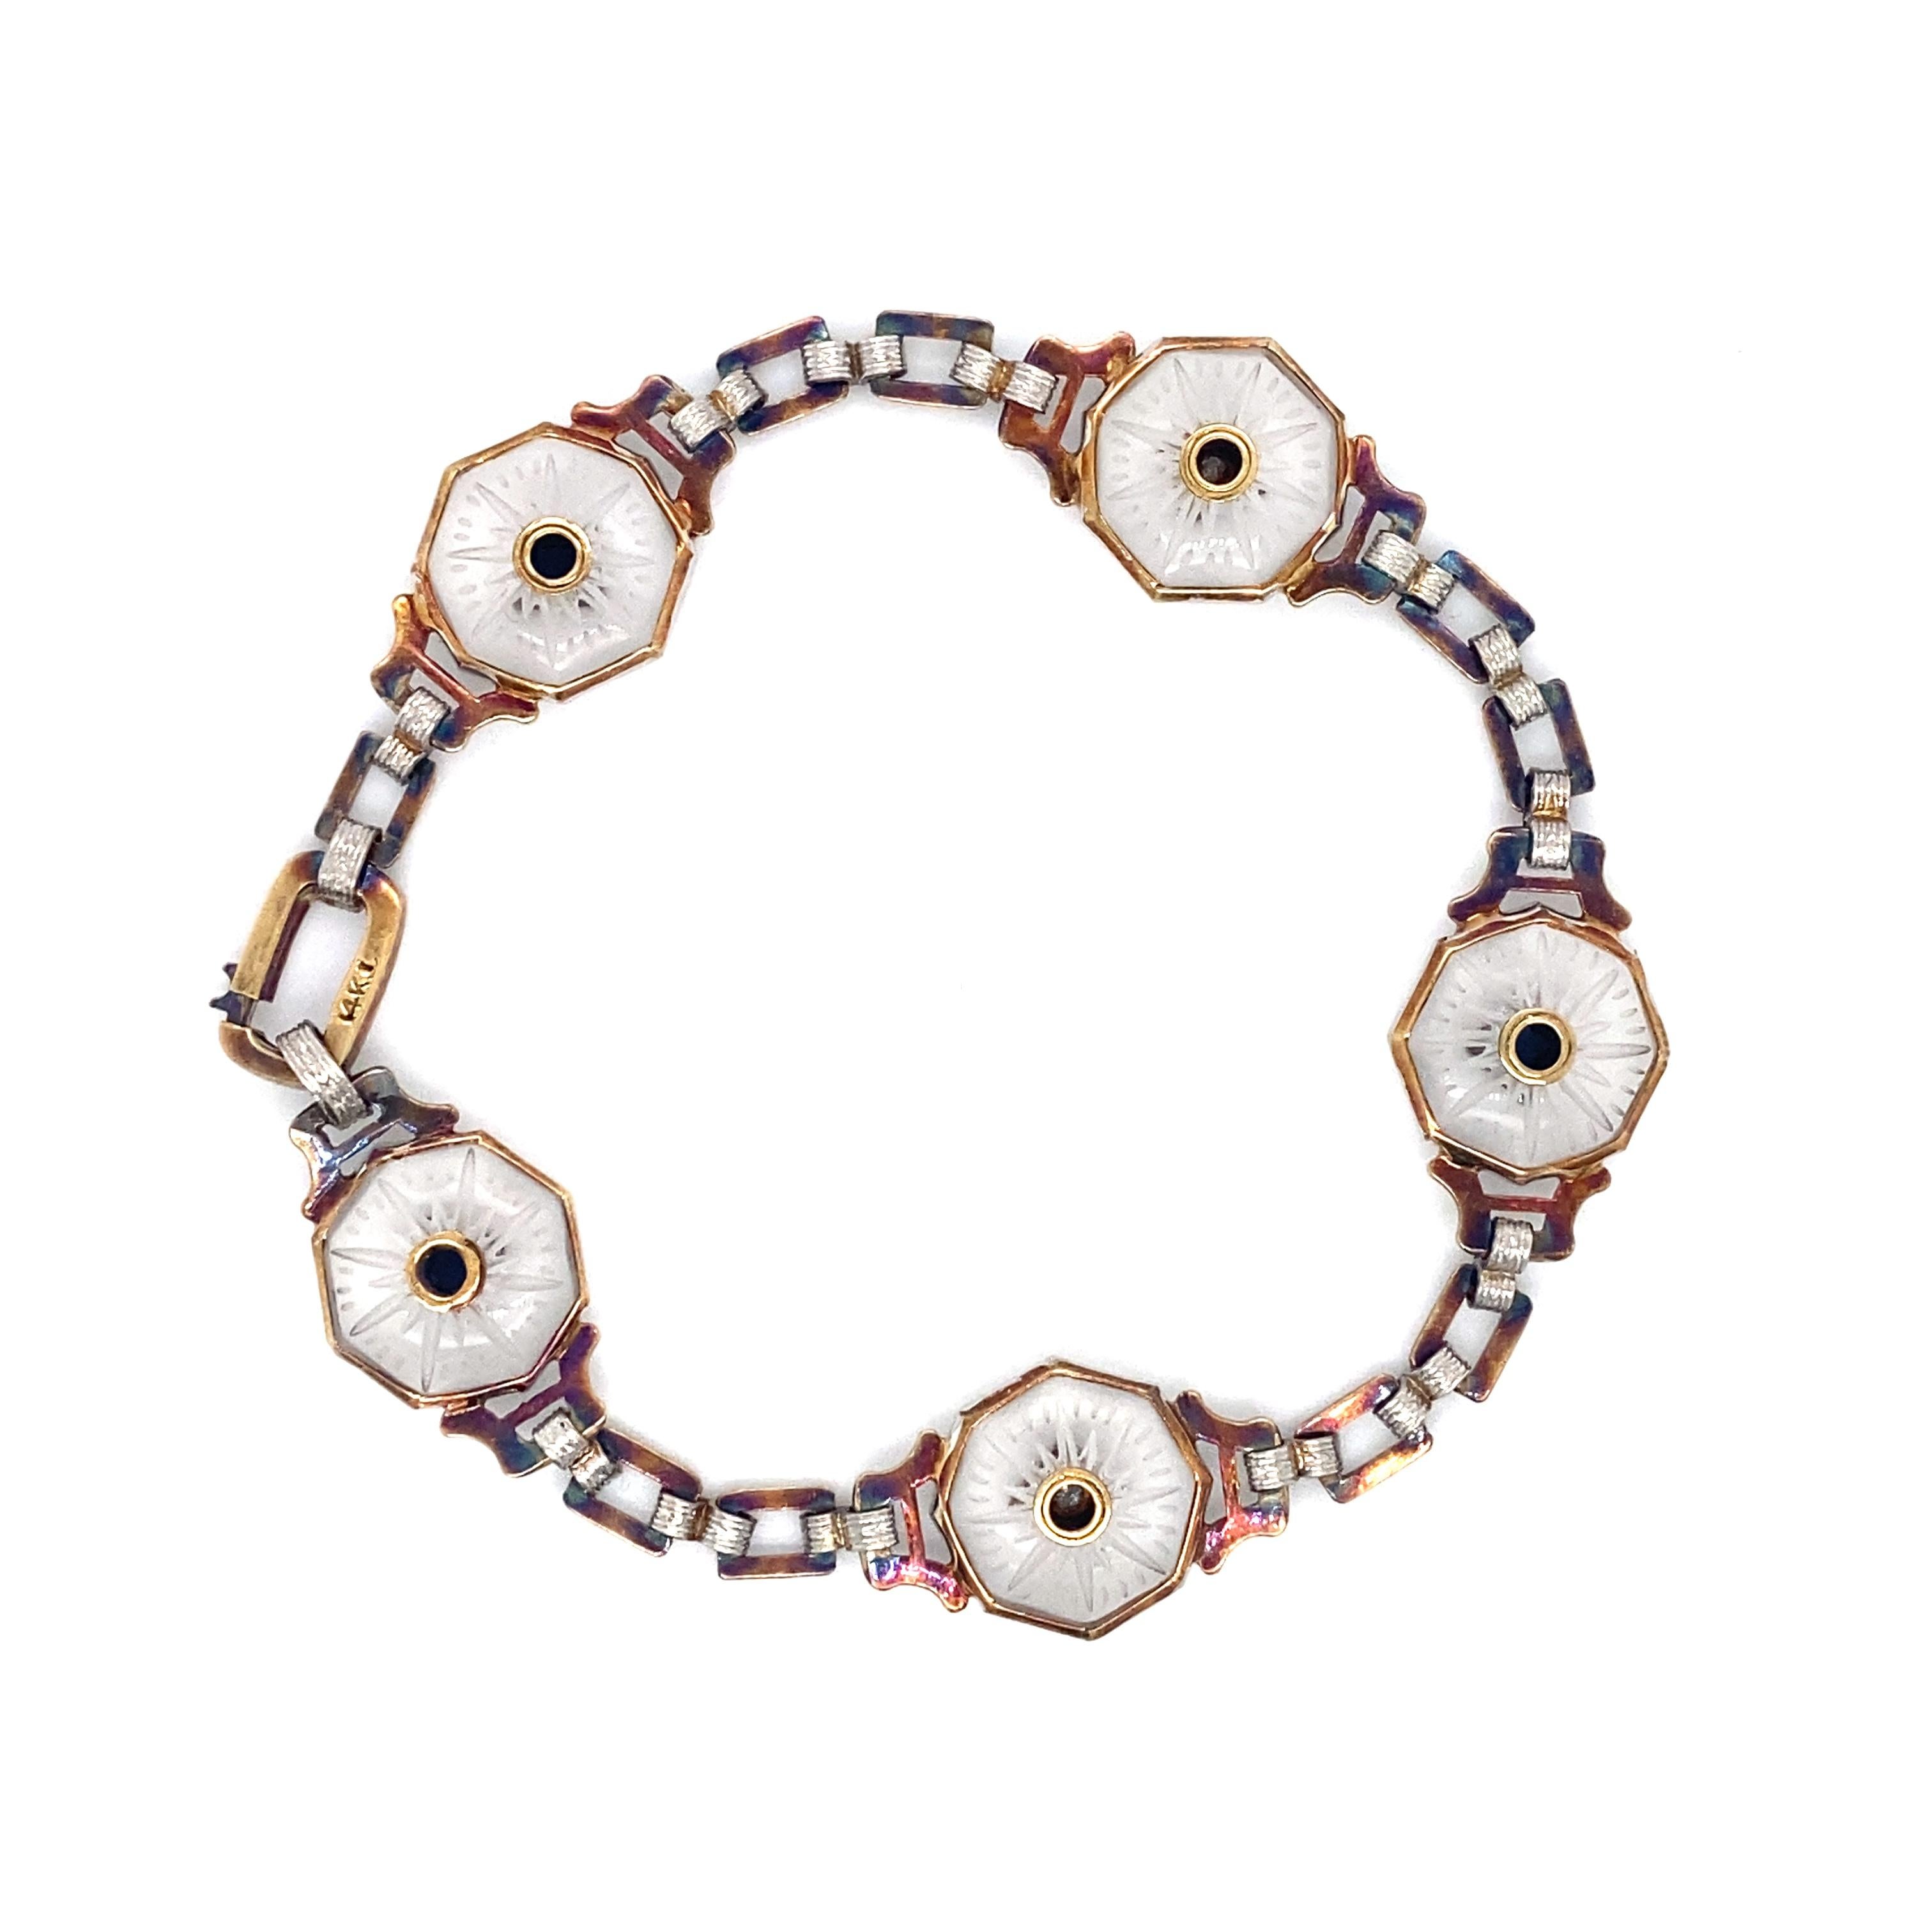 Item Details: This Victorian-era bracelet has links of bezel set rock crystal with alternating French cut sapphire and single cut diamond accents. This is a gorgeous piece with beautiful Victorian flair!

Circa: 1880s
Metal Type: 14 karat white